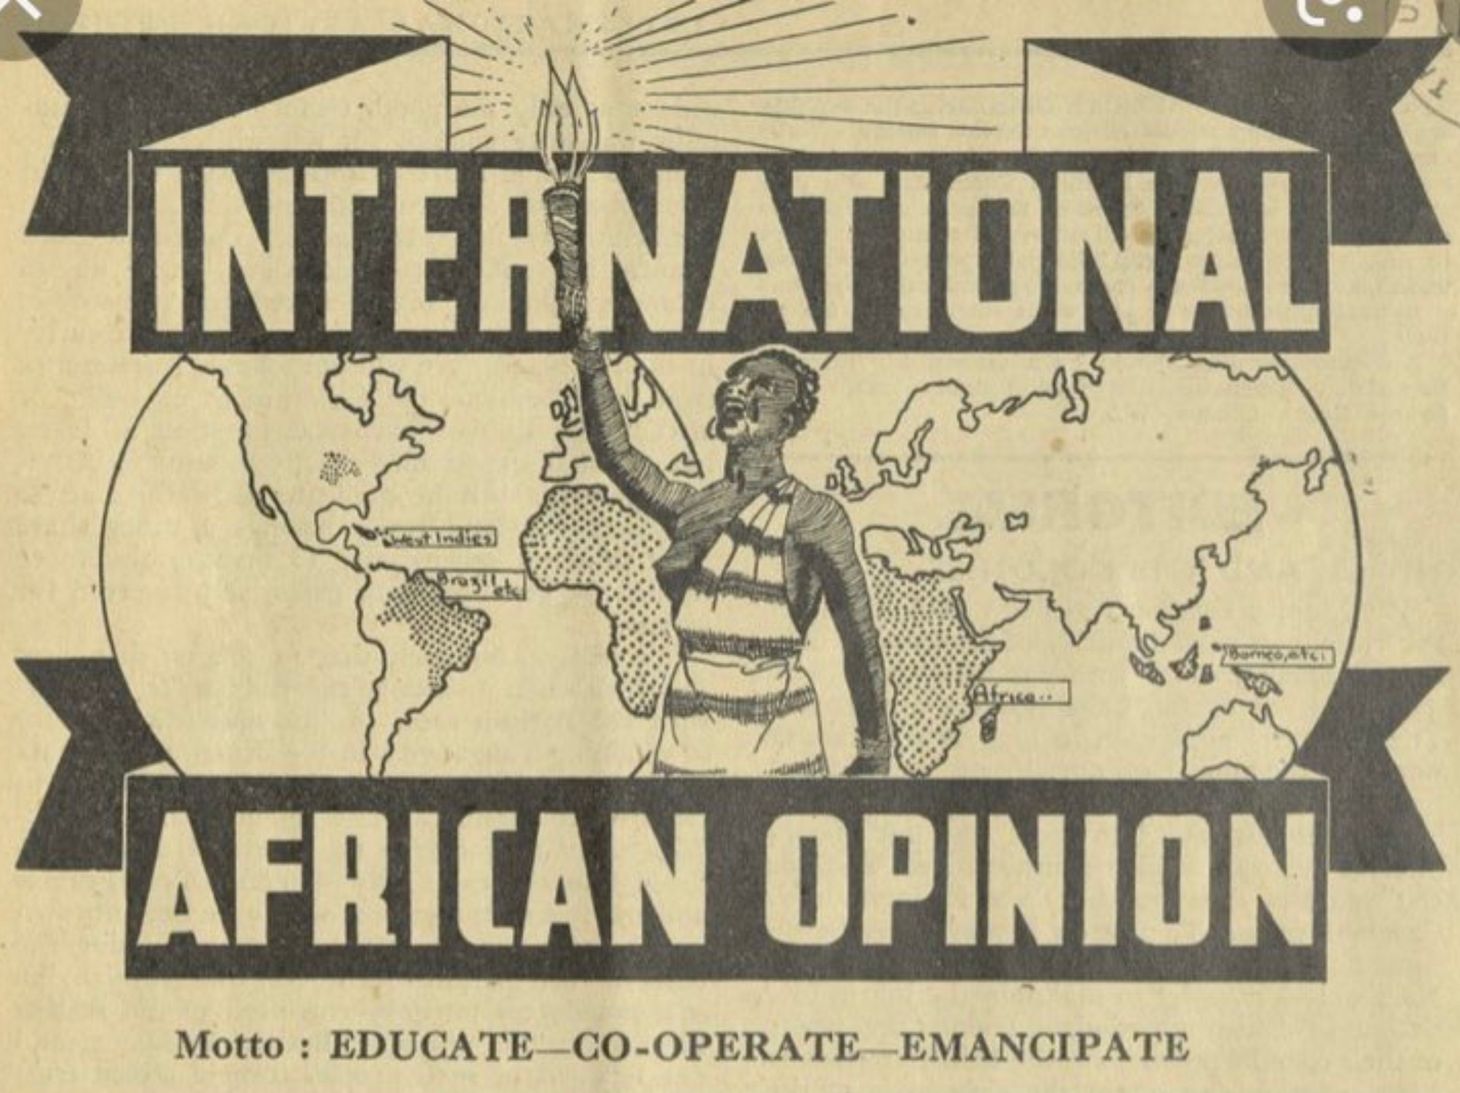 “All People Oppressed by Imperialism around the World”: Competing Global Visions in the Interwar Period, 1919-1939